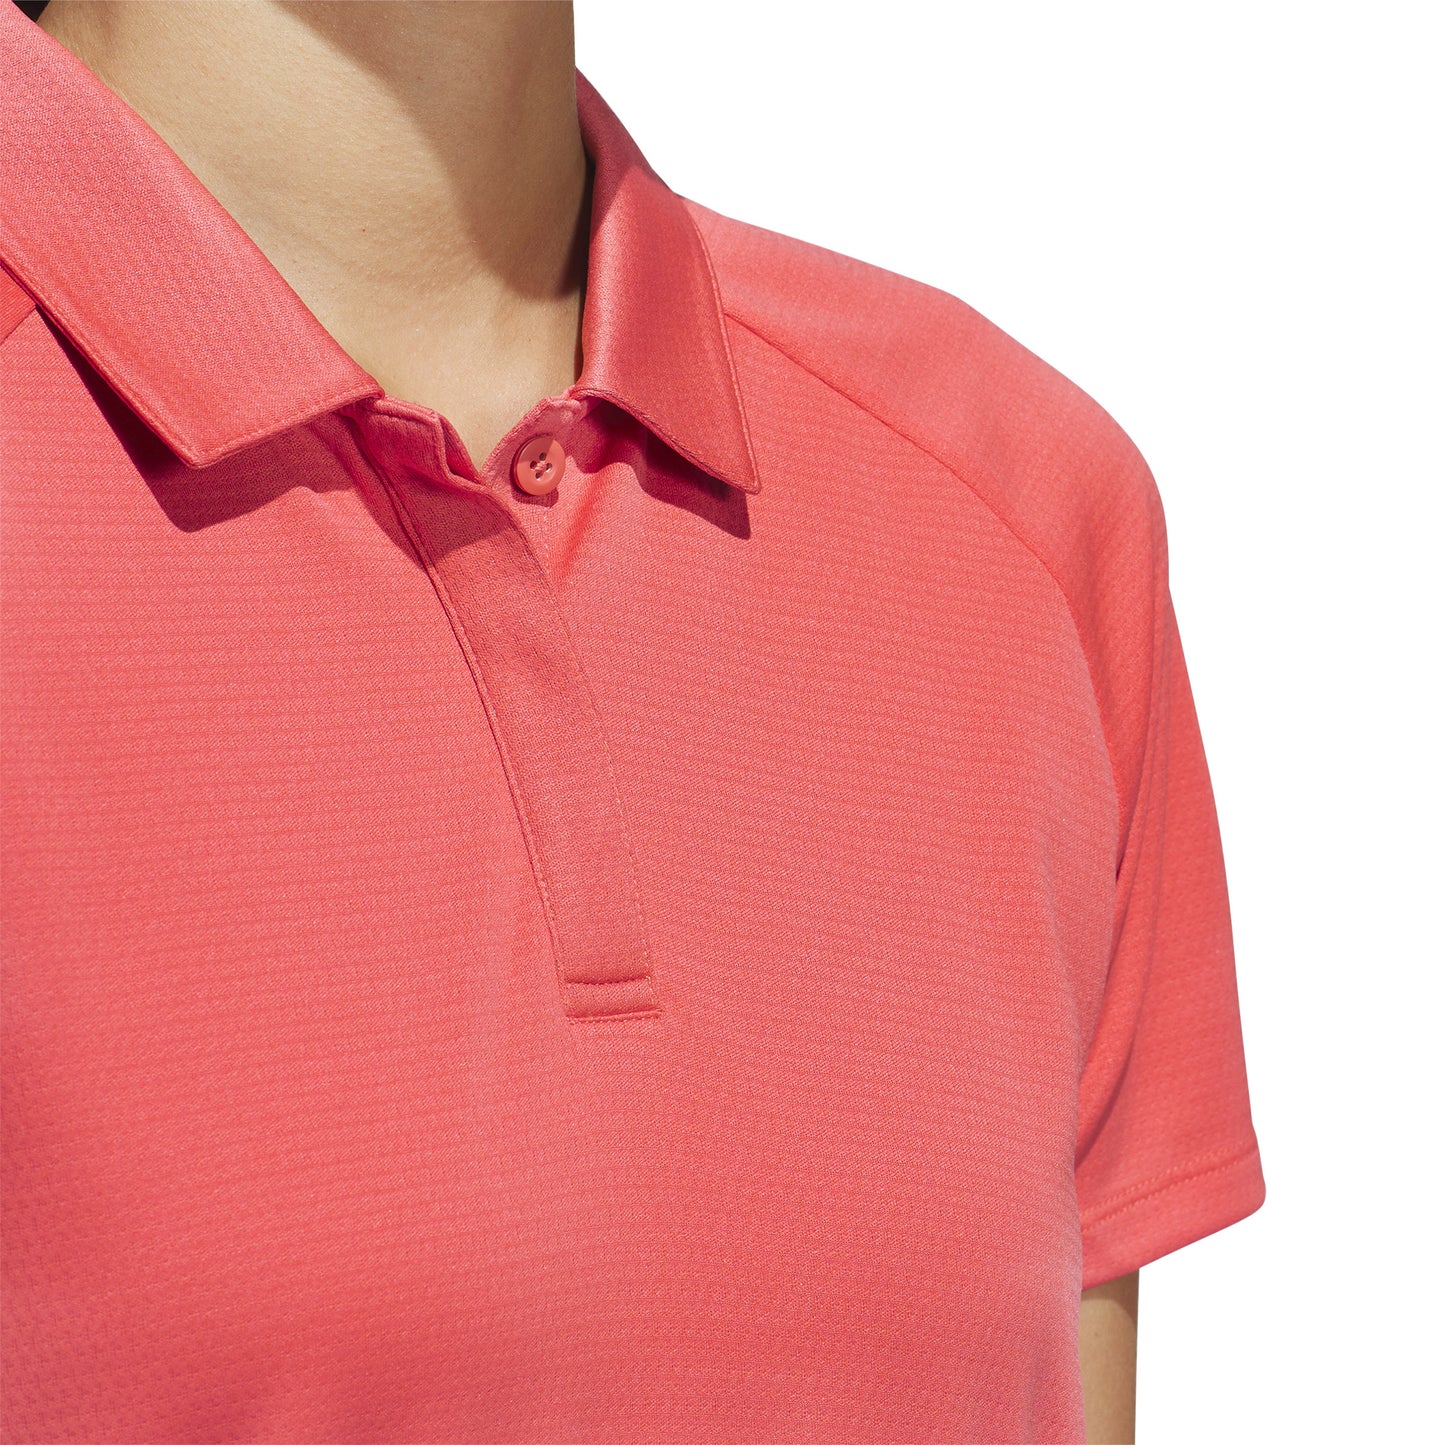 adidas Ladies Short Sleeve Golf Polo with Textured Weave Finish